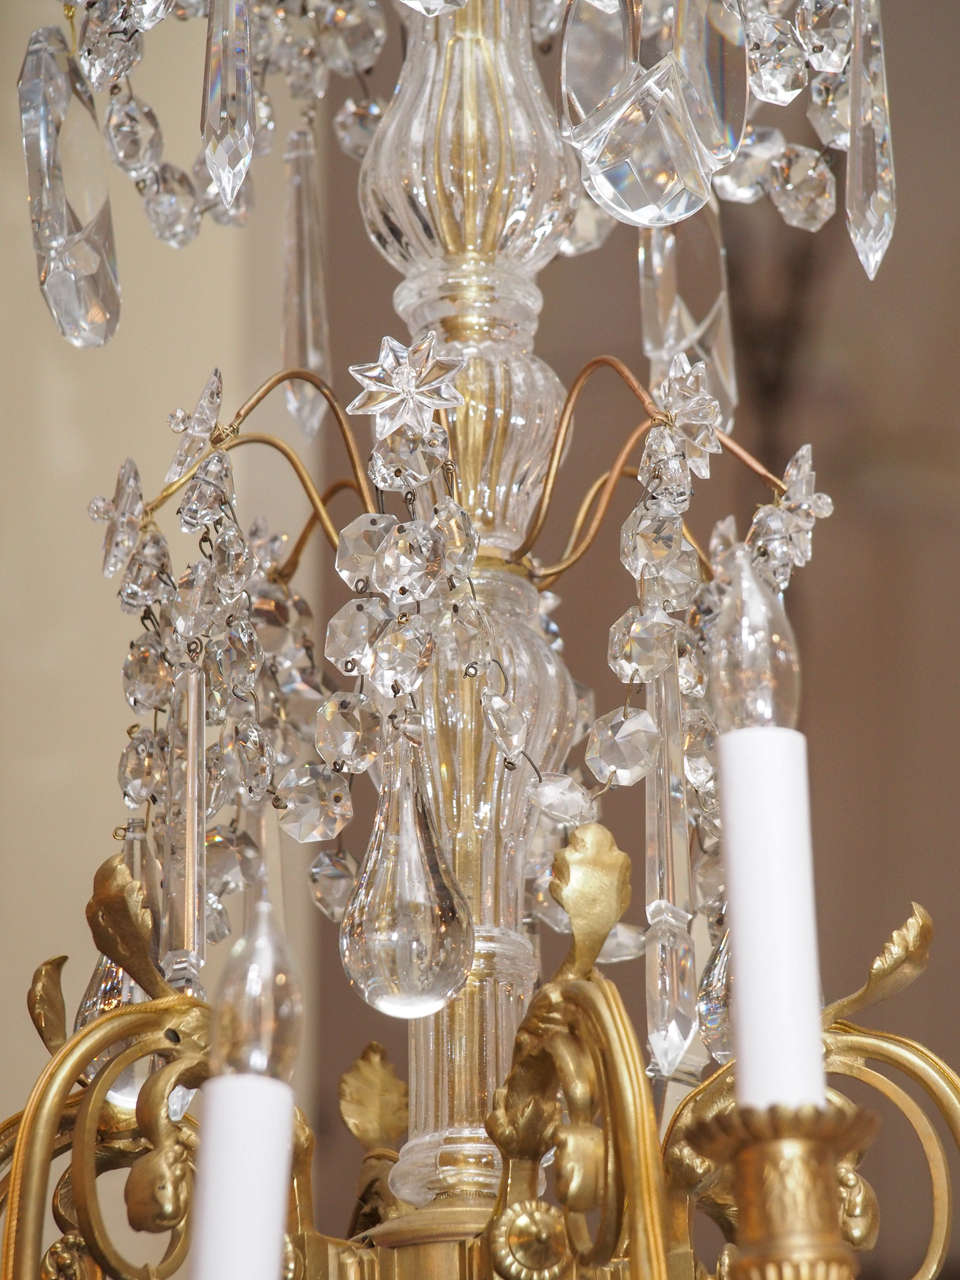 19th Century Antique French Crystal and Bronze Baccarat Chandelier, circa 1890-1900